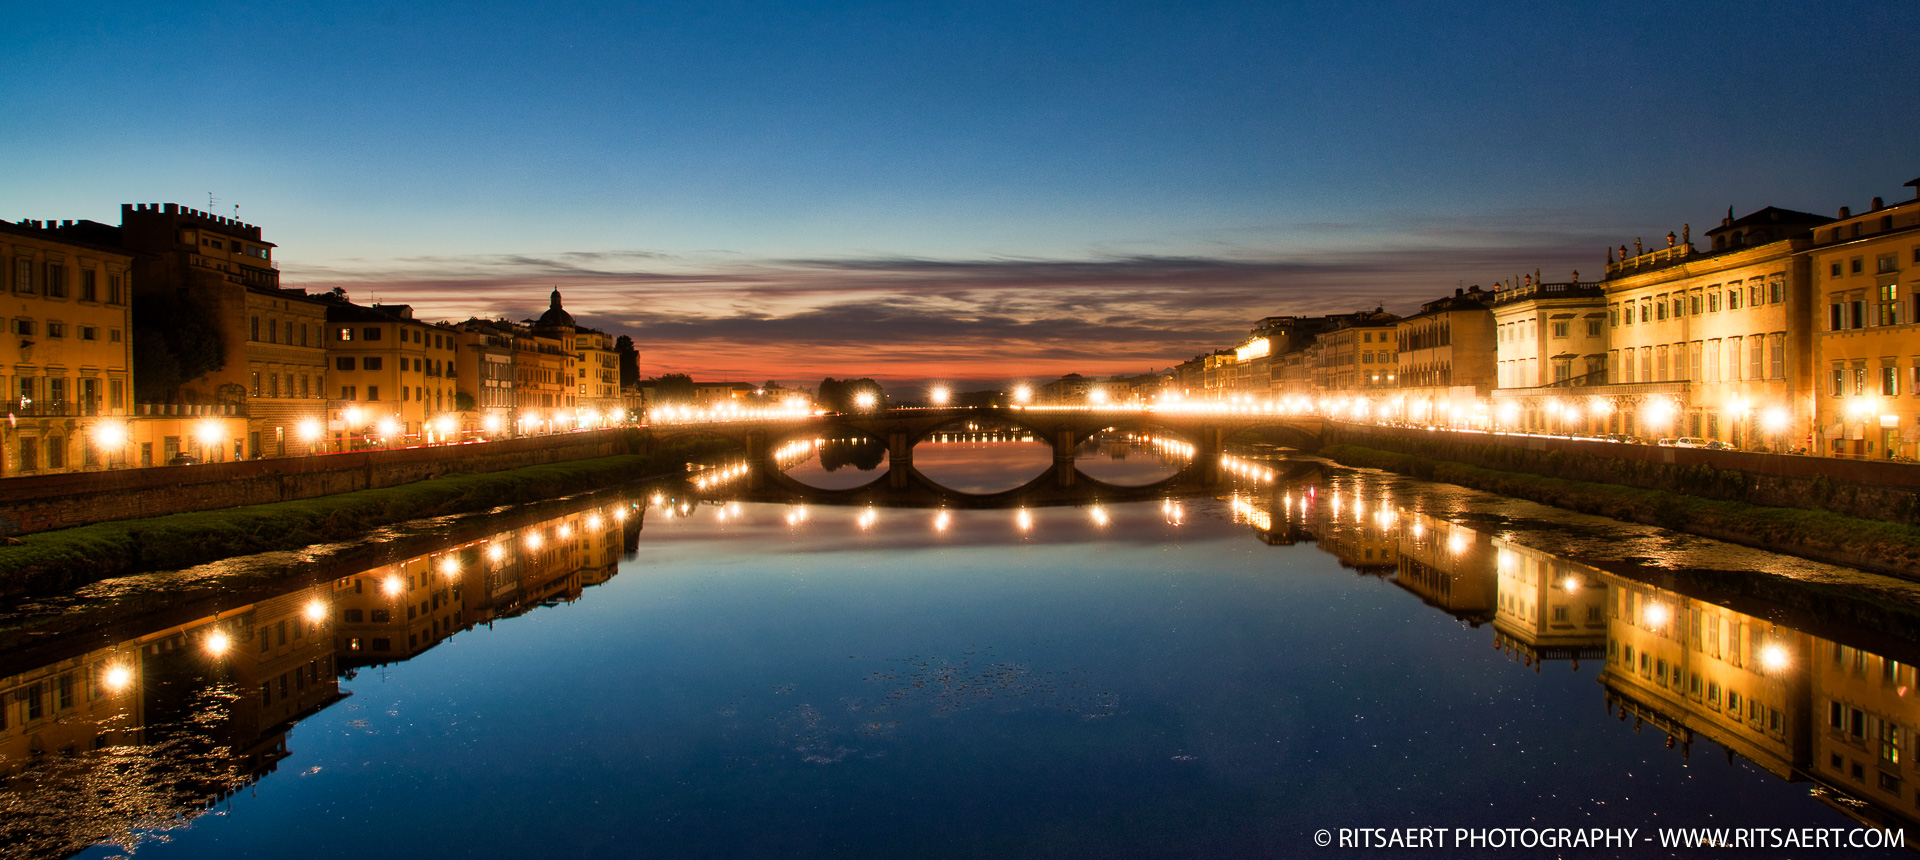 Sunset at Ponte Vecchio - Florence - Italy